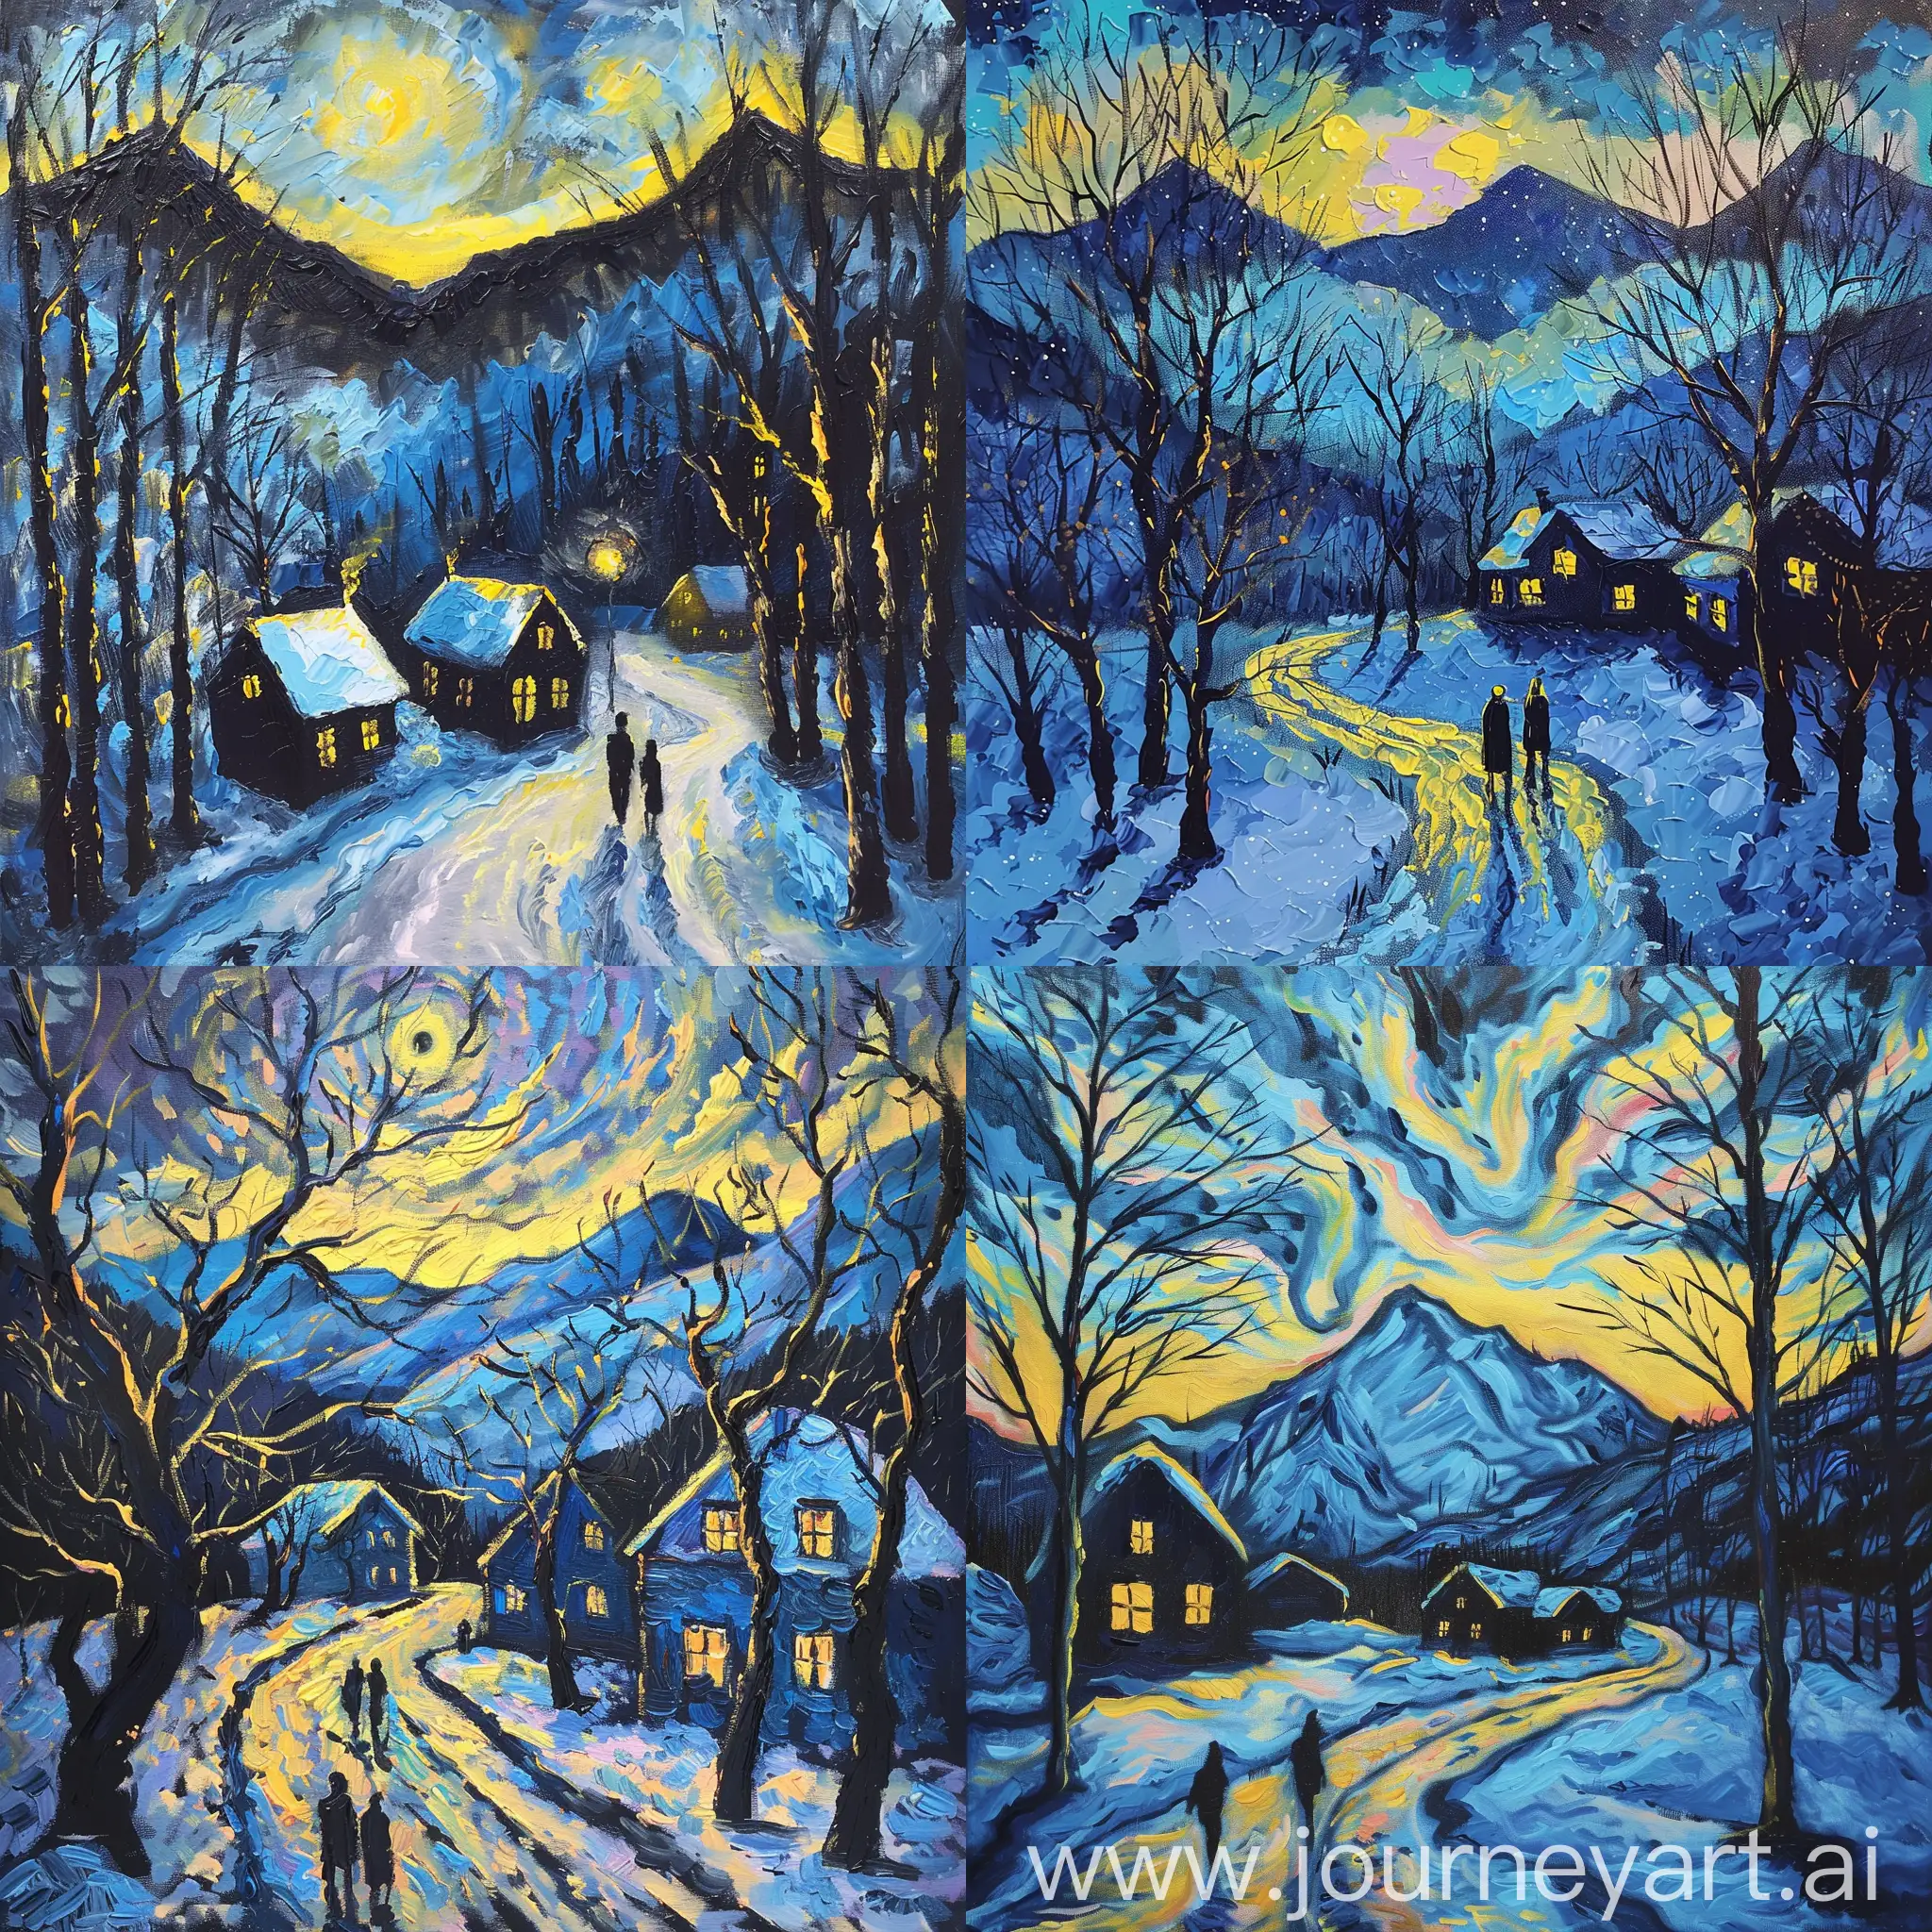 oil painting capturing the essence of a nocturnal landscape with elements of Post-Impressionism Foreground should Include a path or road with bold strokes of yellow and blue to suggest moonlight reflection. Add two figures walking away, dressed in dark clothing for silhouette effect. Midground should include Scatter small, dark houses with glowing windows among bare, leafless trees. Background should include Feature a large mountain range in shades of blue with snow-capped peaks. Create a dynamic sky of blue and black for a turbulent night sky effect. Color Palette should Use a striking palette of blues, yellows, and blacks for vibrancy and energy. Contrast warm yellows against cool blues for visual impact. Unique Features should realistic representation for emotional expression. Emphasize mood and atmosphere through color and brushwork. By incorporating these detailed elements and following the style and color palette described, create a similar artwork that captures the beauty and emotion of a nocturnal journey in a Post-Impressionist style. with bright pastel colours